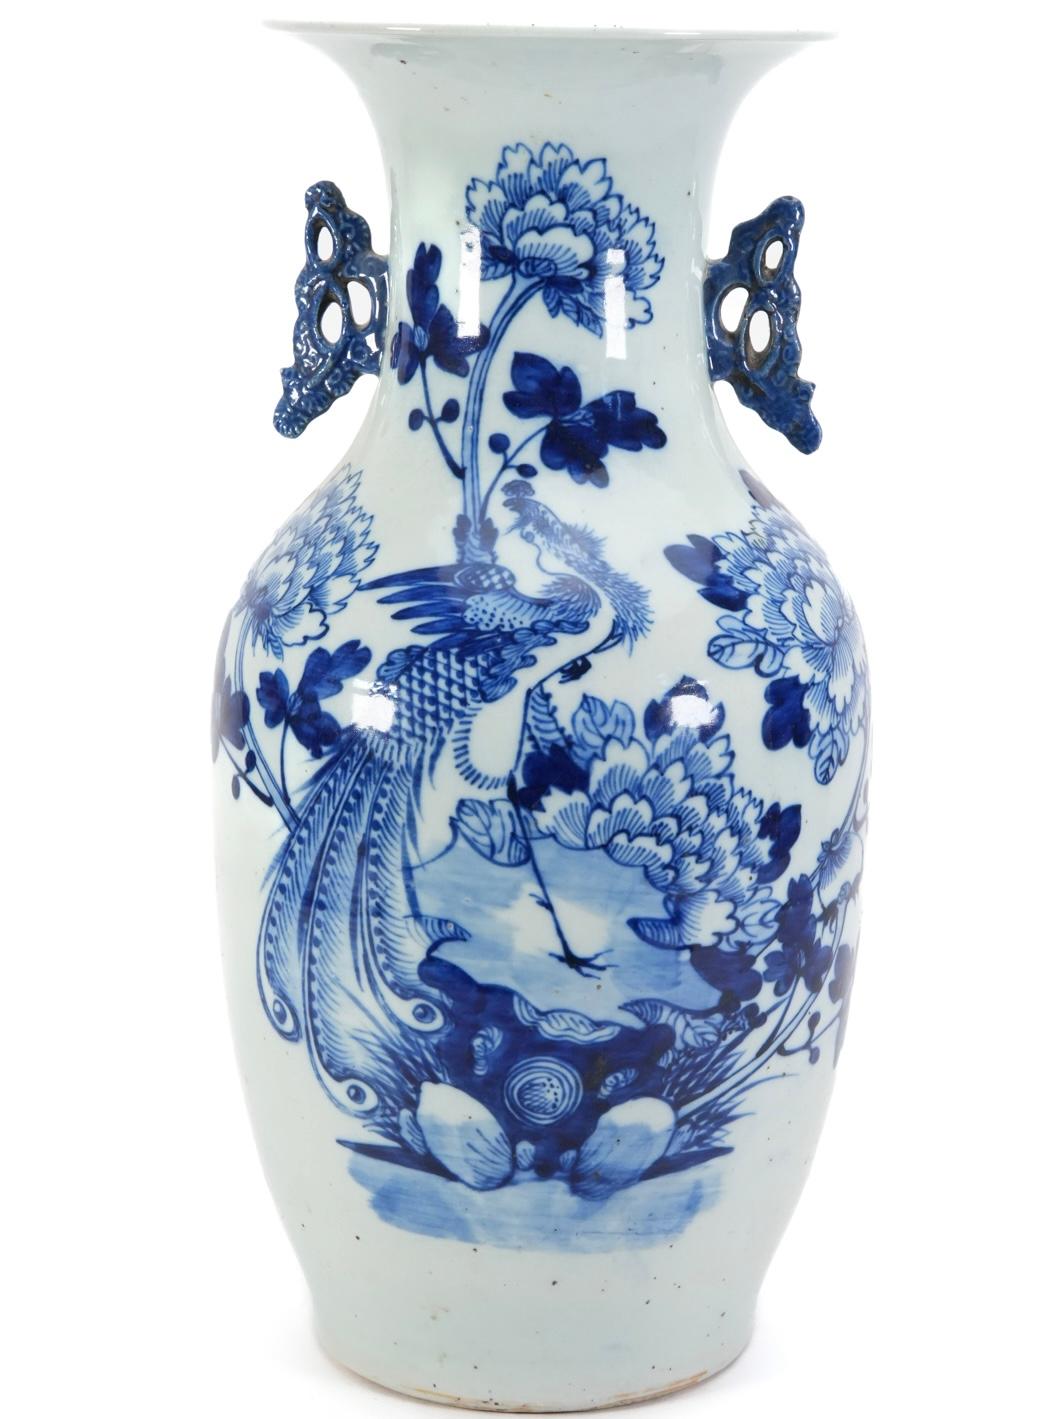 Beautiful Chinese Porcelain Vase of a Baluster shape with White and Blue decoration, featuring a Peacock surrounded by flowers and foliage.
Late 19th C. 
This Decorative Vase has openwork handles with a leafy motif and a harmonious ovoid body and